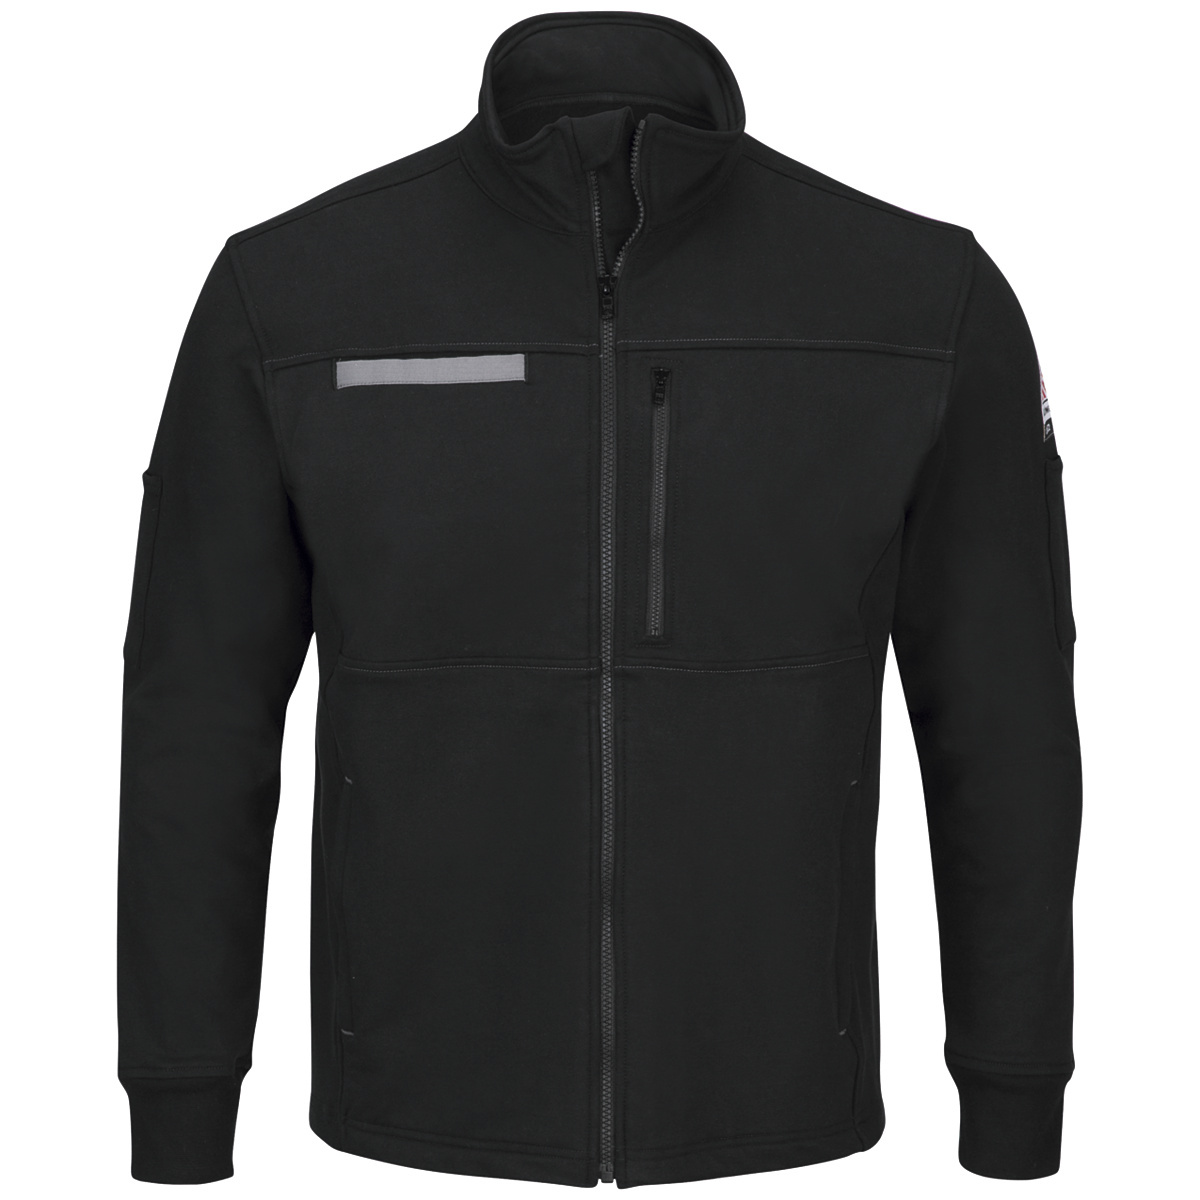 Bulwark® Small| Regular Black Cotton/Spandex Flame Resistant Jacket With Zipper Front Closure